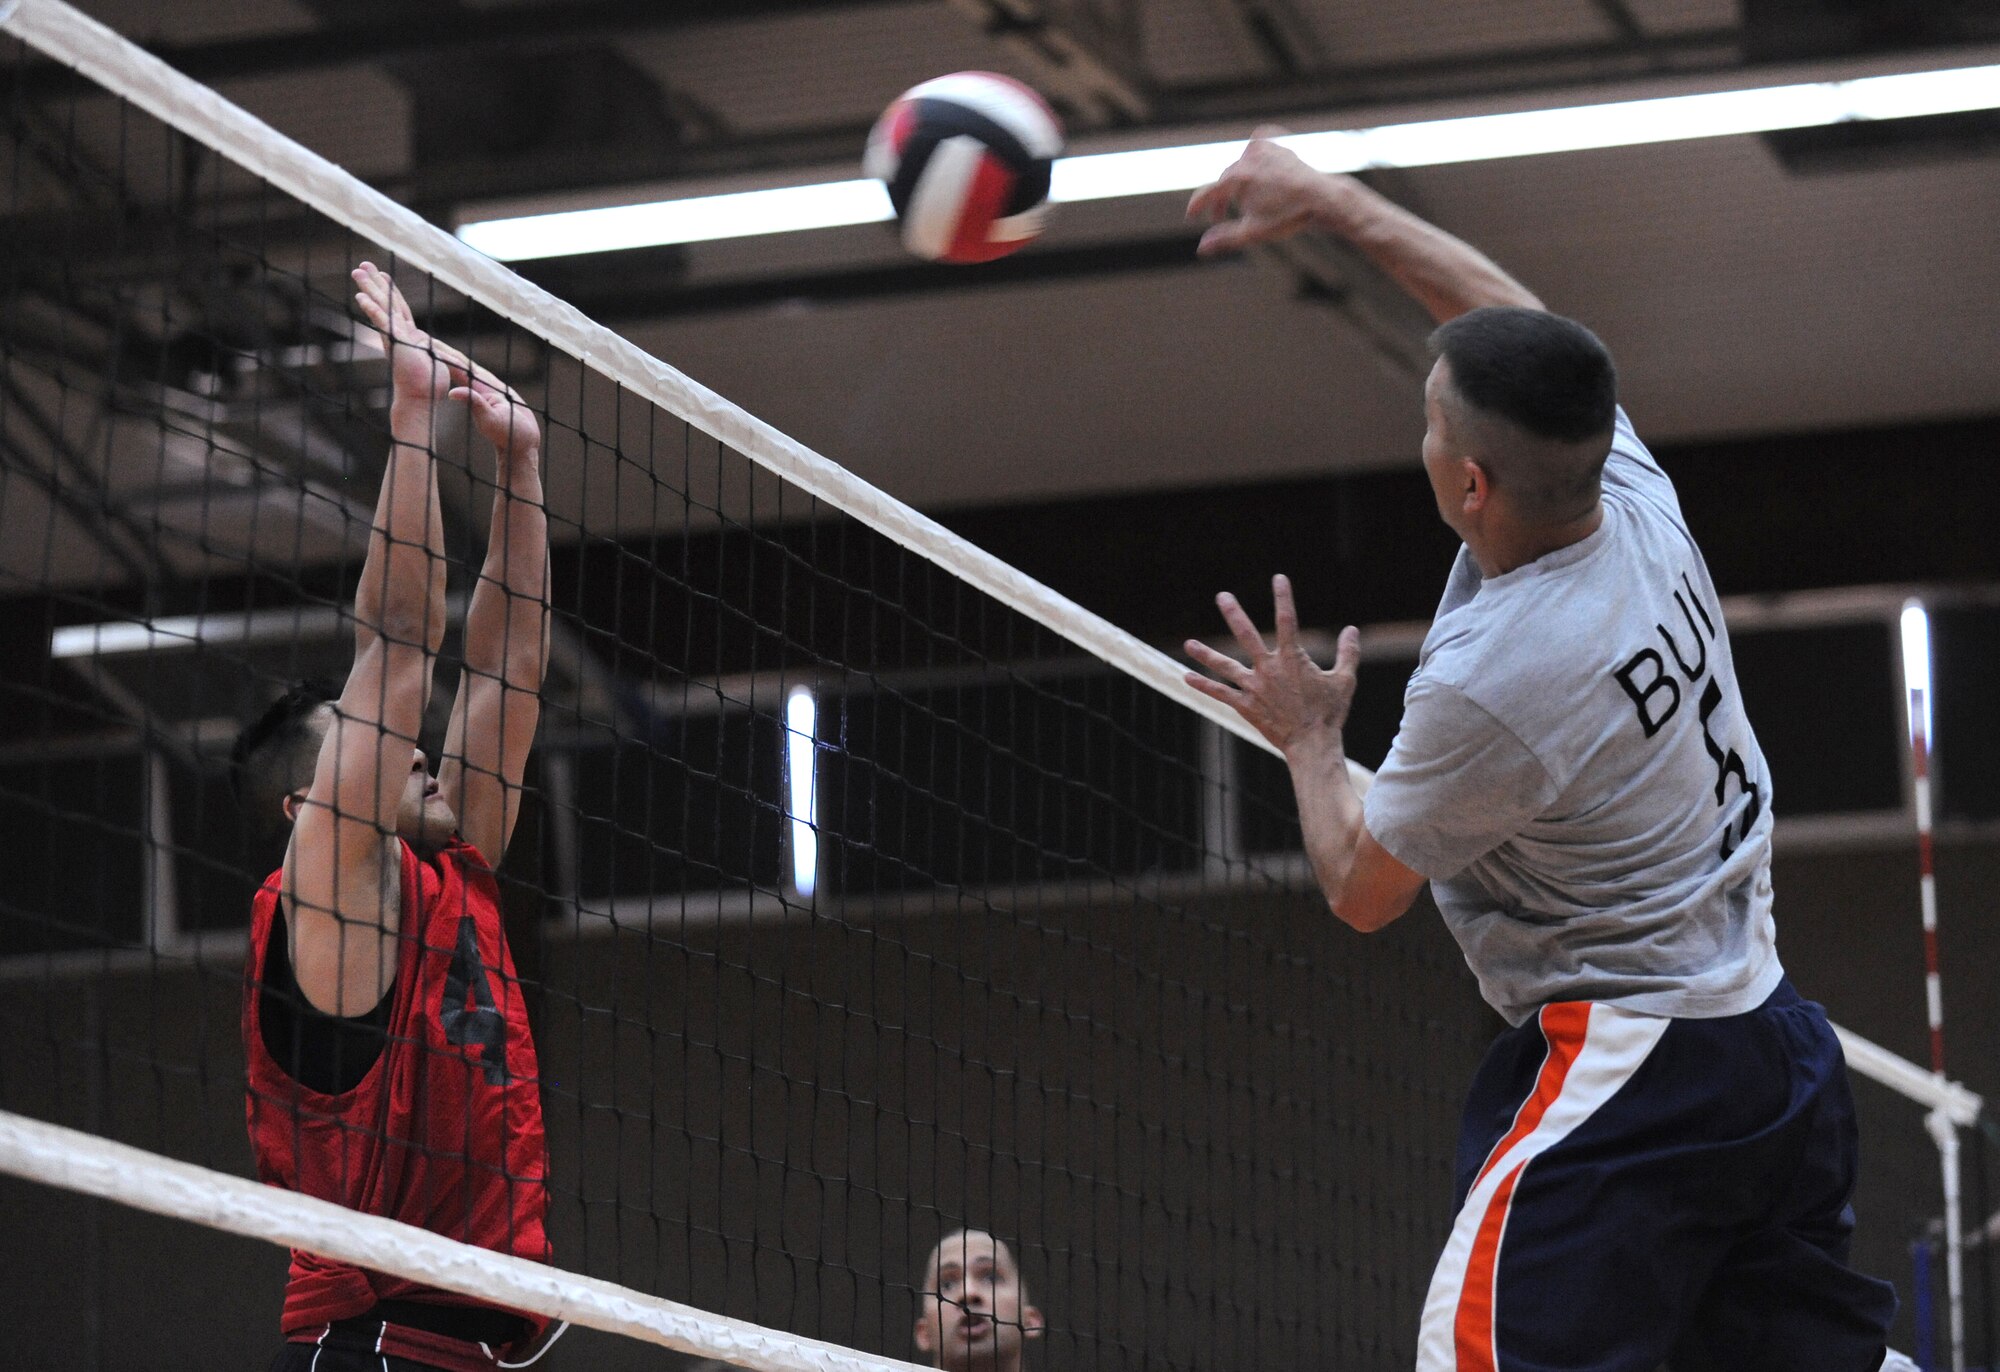 SPANGDAHLEM AIR BASE, Germany – Tuan Bui, 52nd Civil Engineer Squadron, spikes the ball over Scott Whipple, 52nd Medical Group, during the intramural volleyball championship series here May 9. The CES defeated MDG 25-16, 19-25, 15-10 to become the intramural volleyball champions. (U.S. Air Force photo/Senior Airman Nathanael Callon)